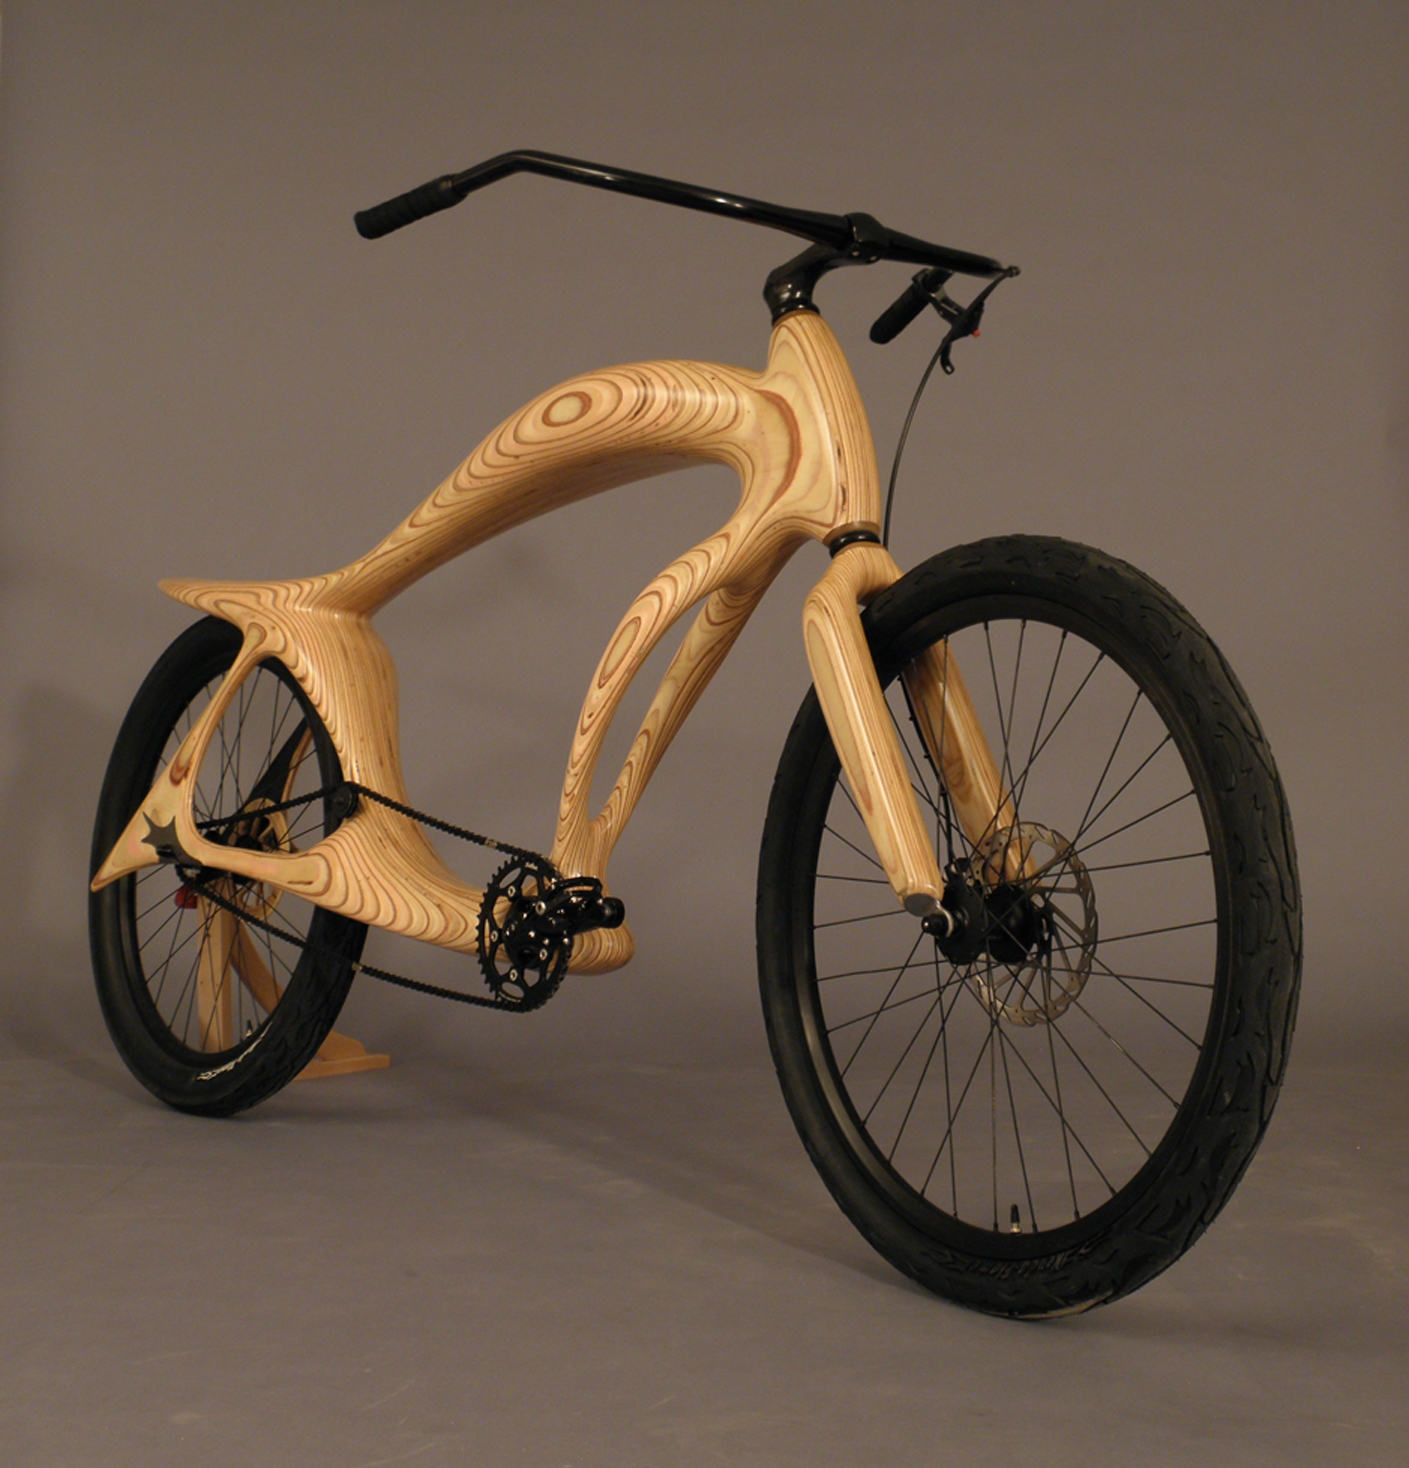 Bekes Wooden Bicycles won the Best in Show award at the 2014 WDC – one of hundreds of museum-quality handmade pieces on view at the annual Exhibit + Sale.